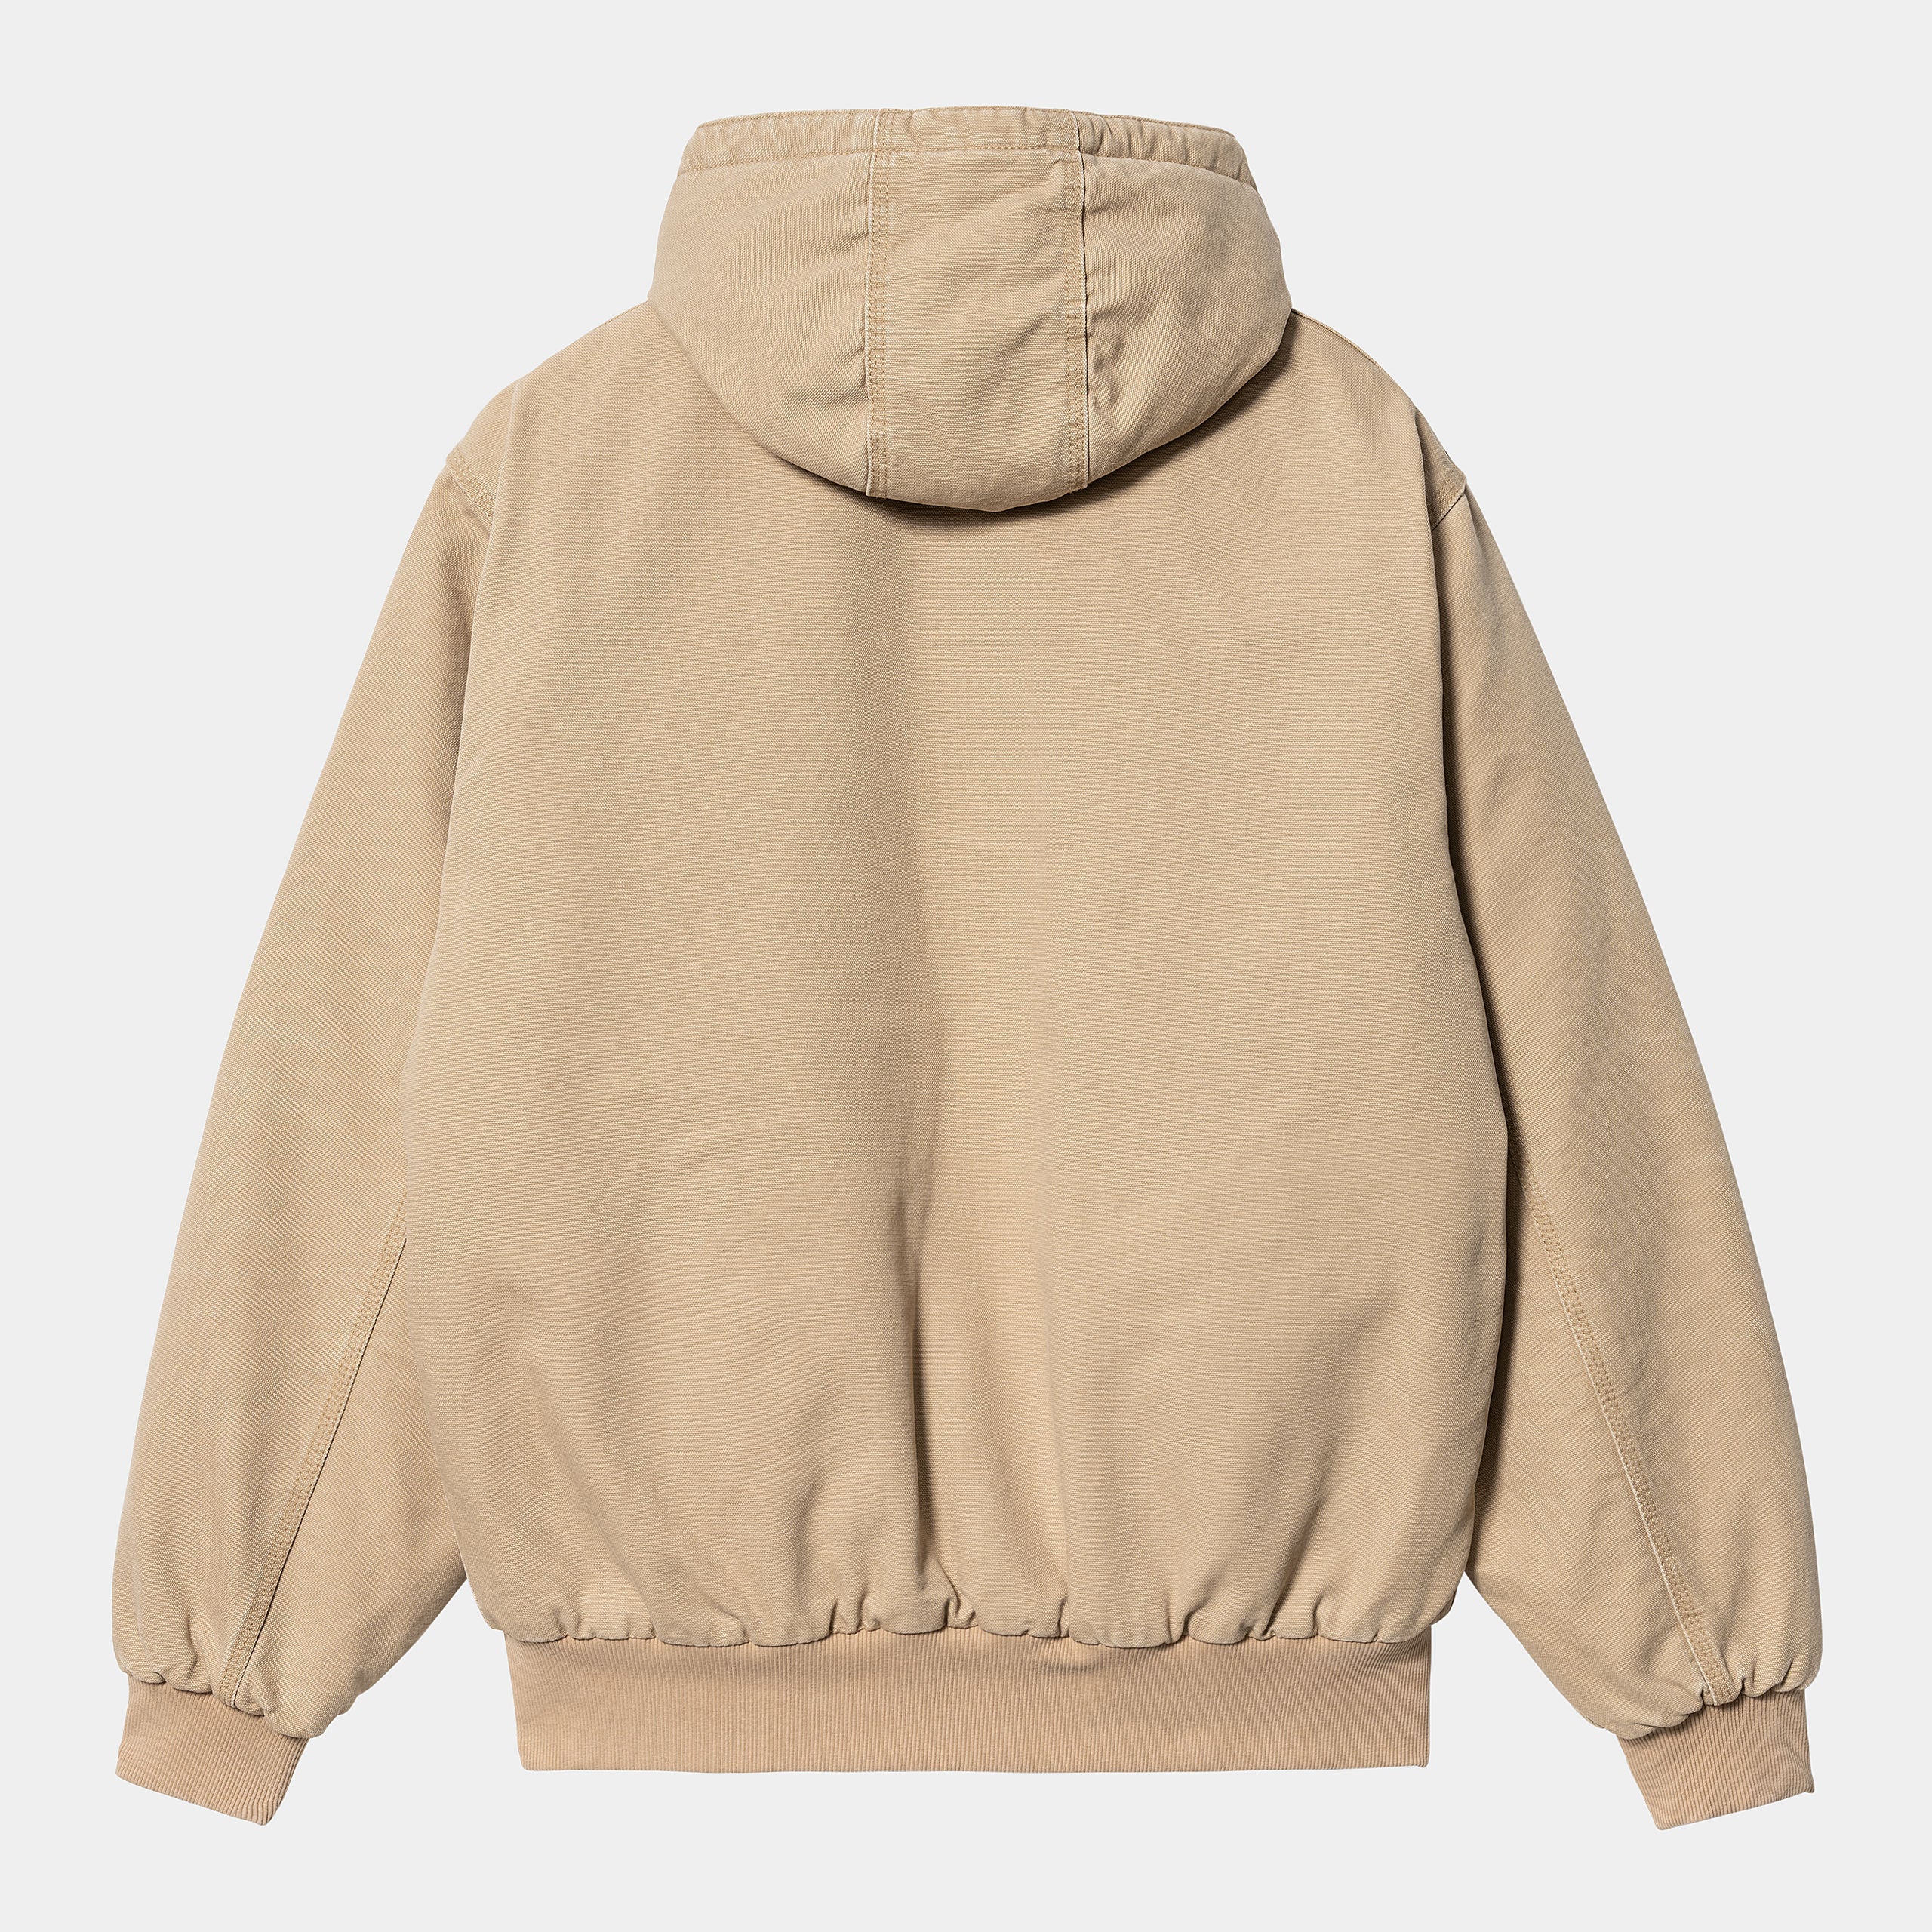 Carhartt WIP OG Active Jacket (dusty H brown) - Blue Mountain Store